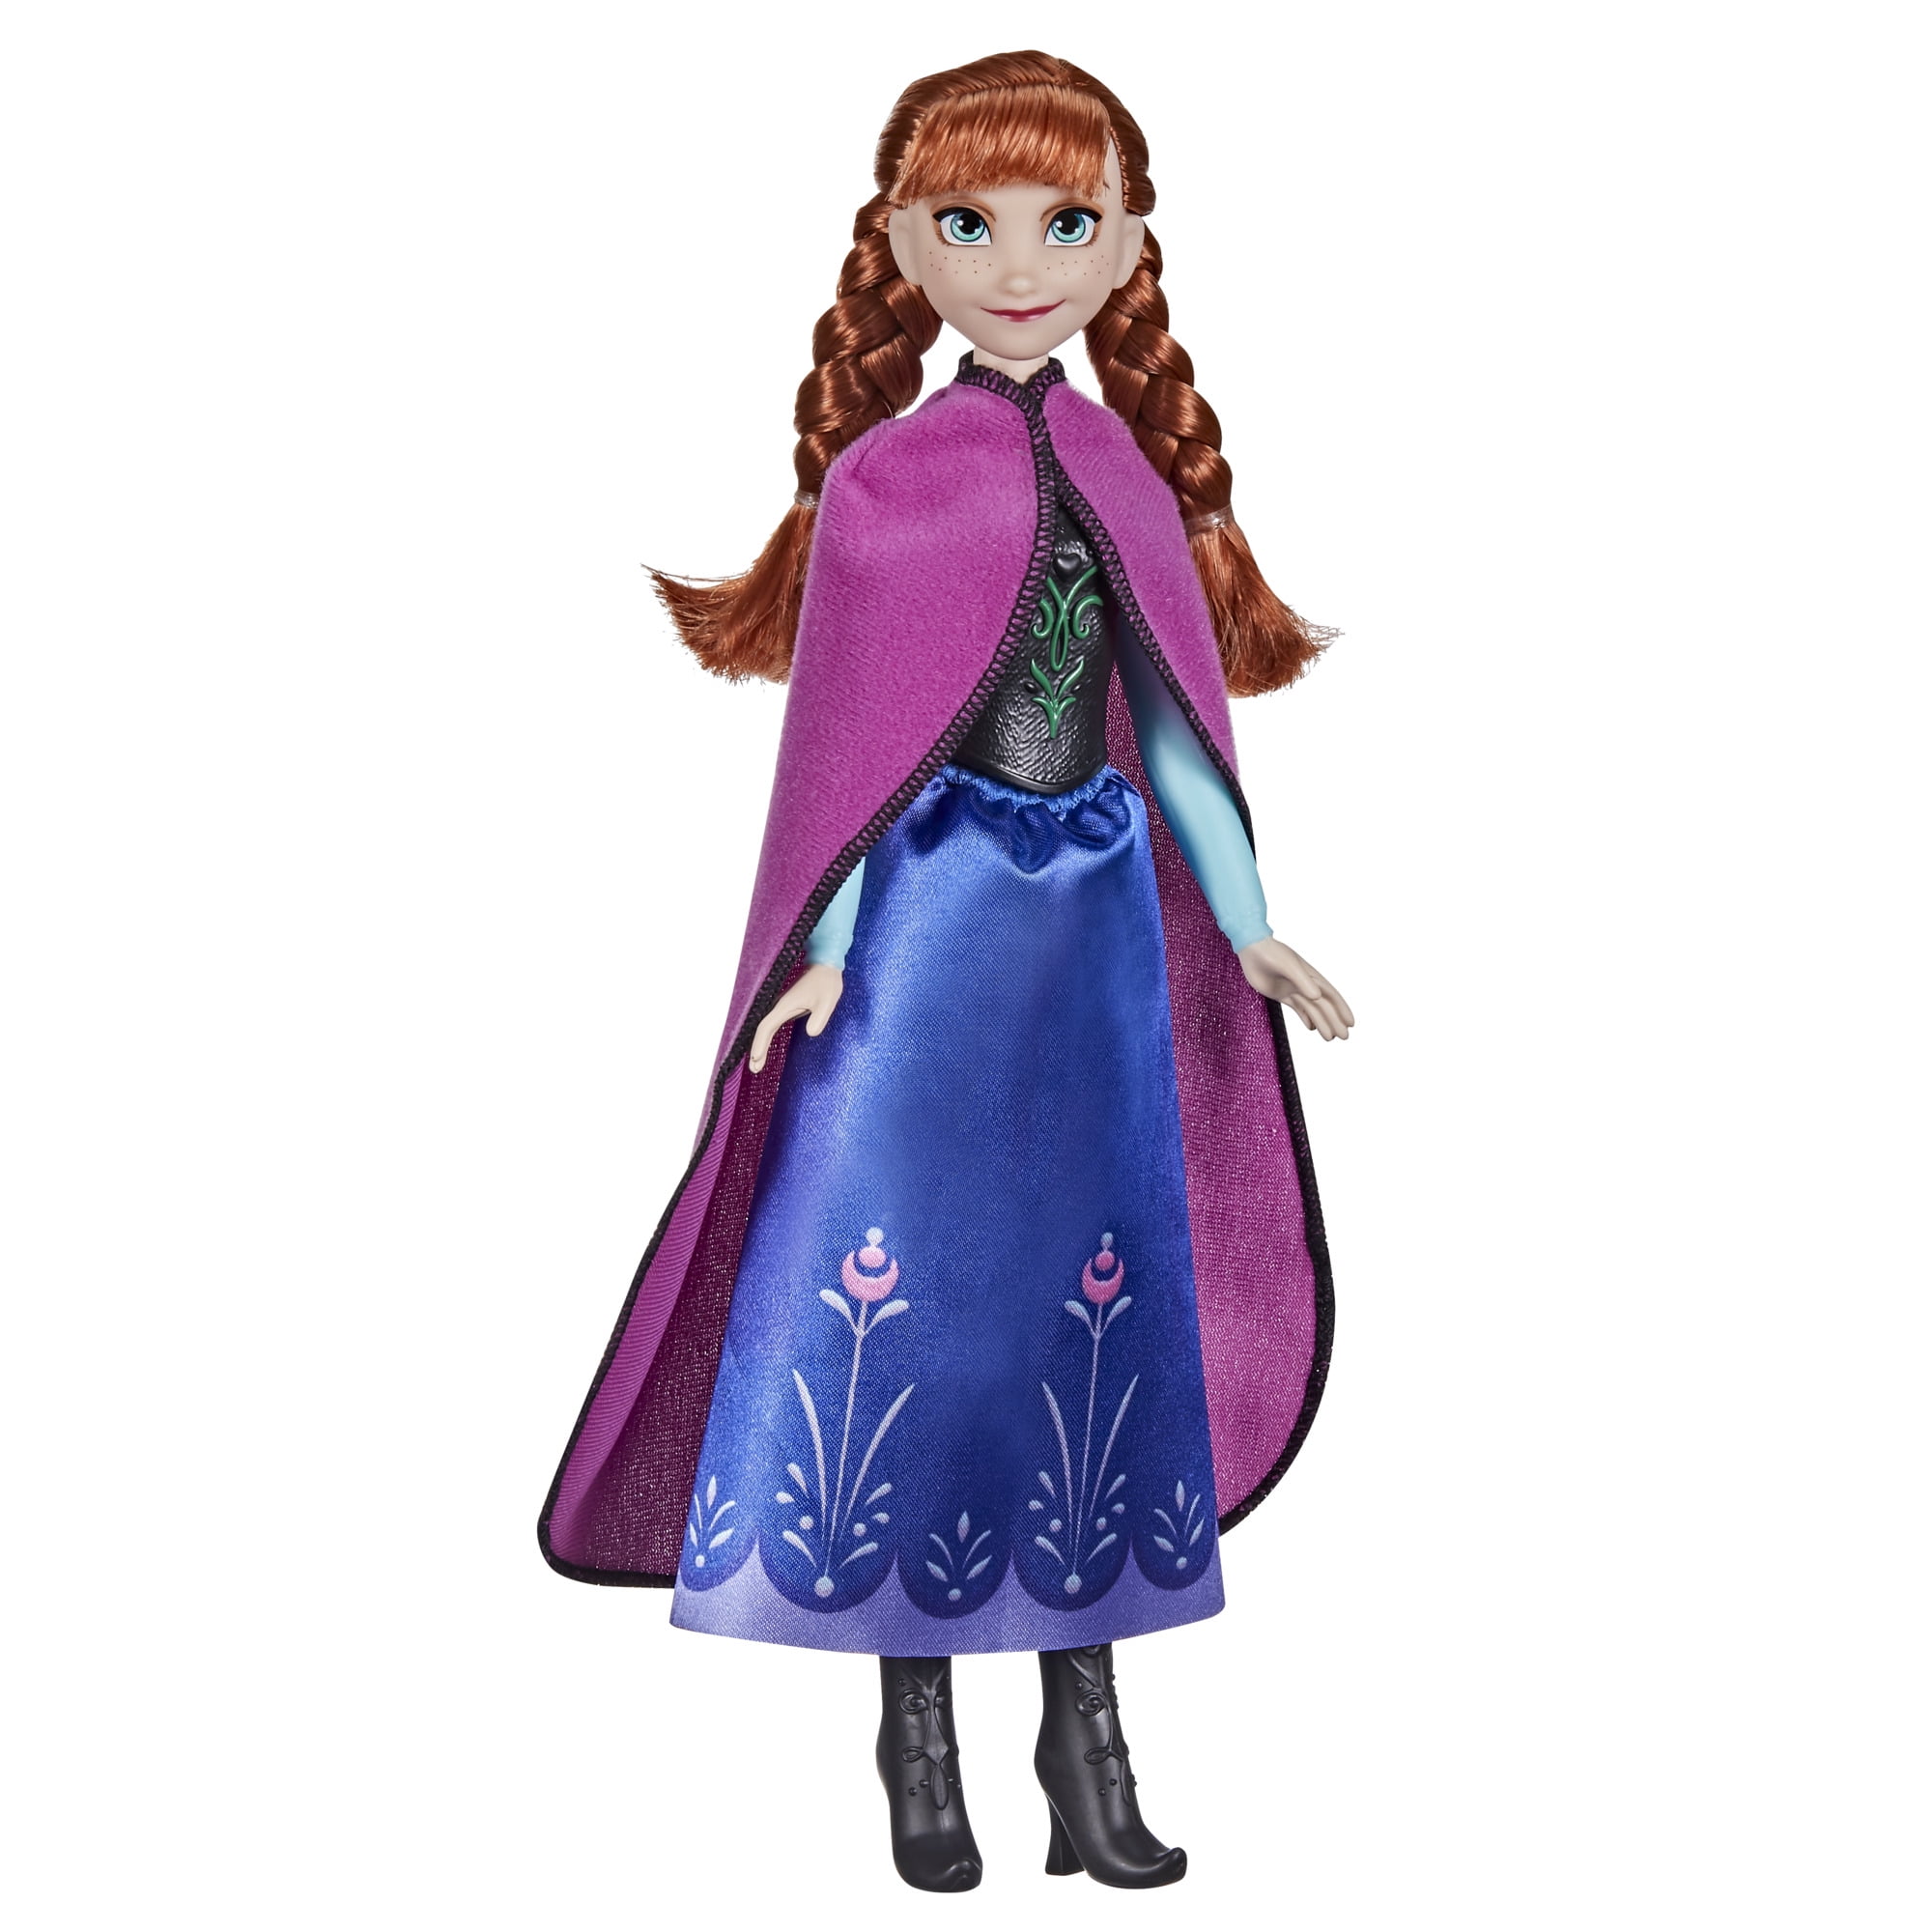 Disney Frozen Disney'S Frozen Shimmer Anna Fashion Doll, Skirt, Shoes, And Long Red Hair